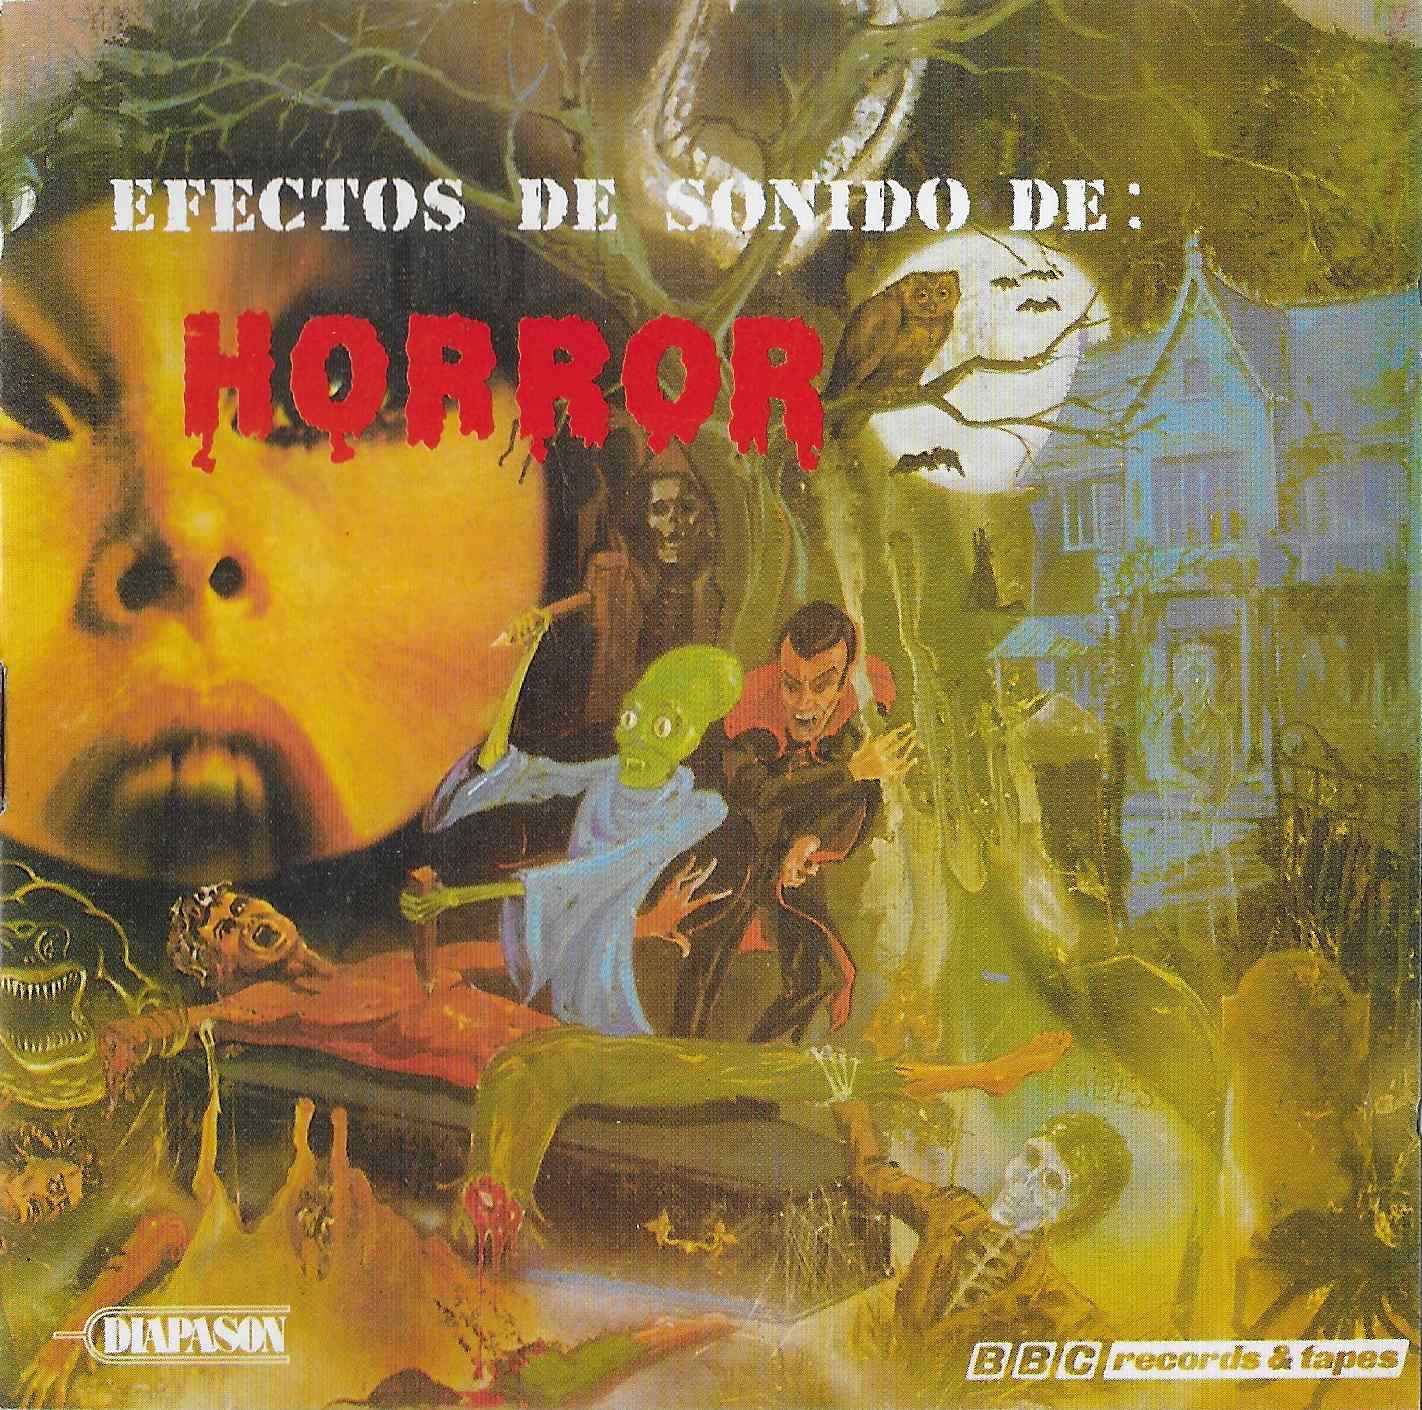 Picture of 95 0030 Efectos de sonido de horror by artist Various from the BBC cds - Records and Tapes library